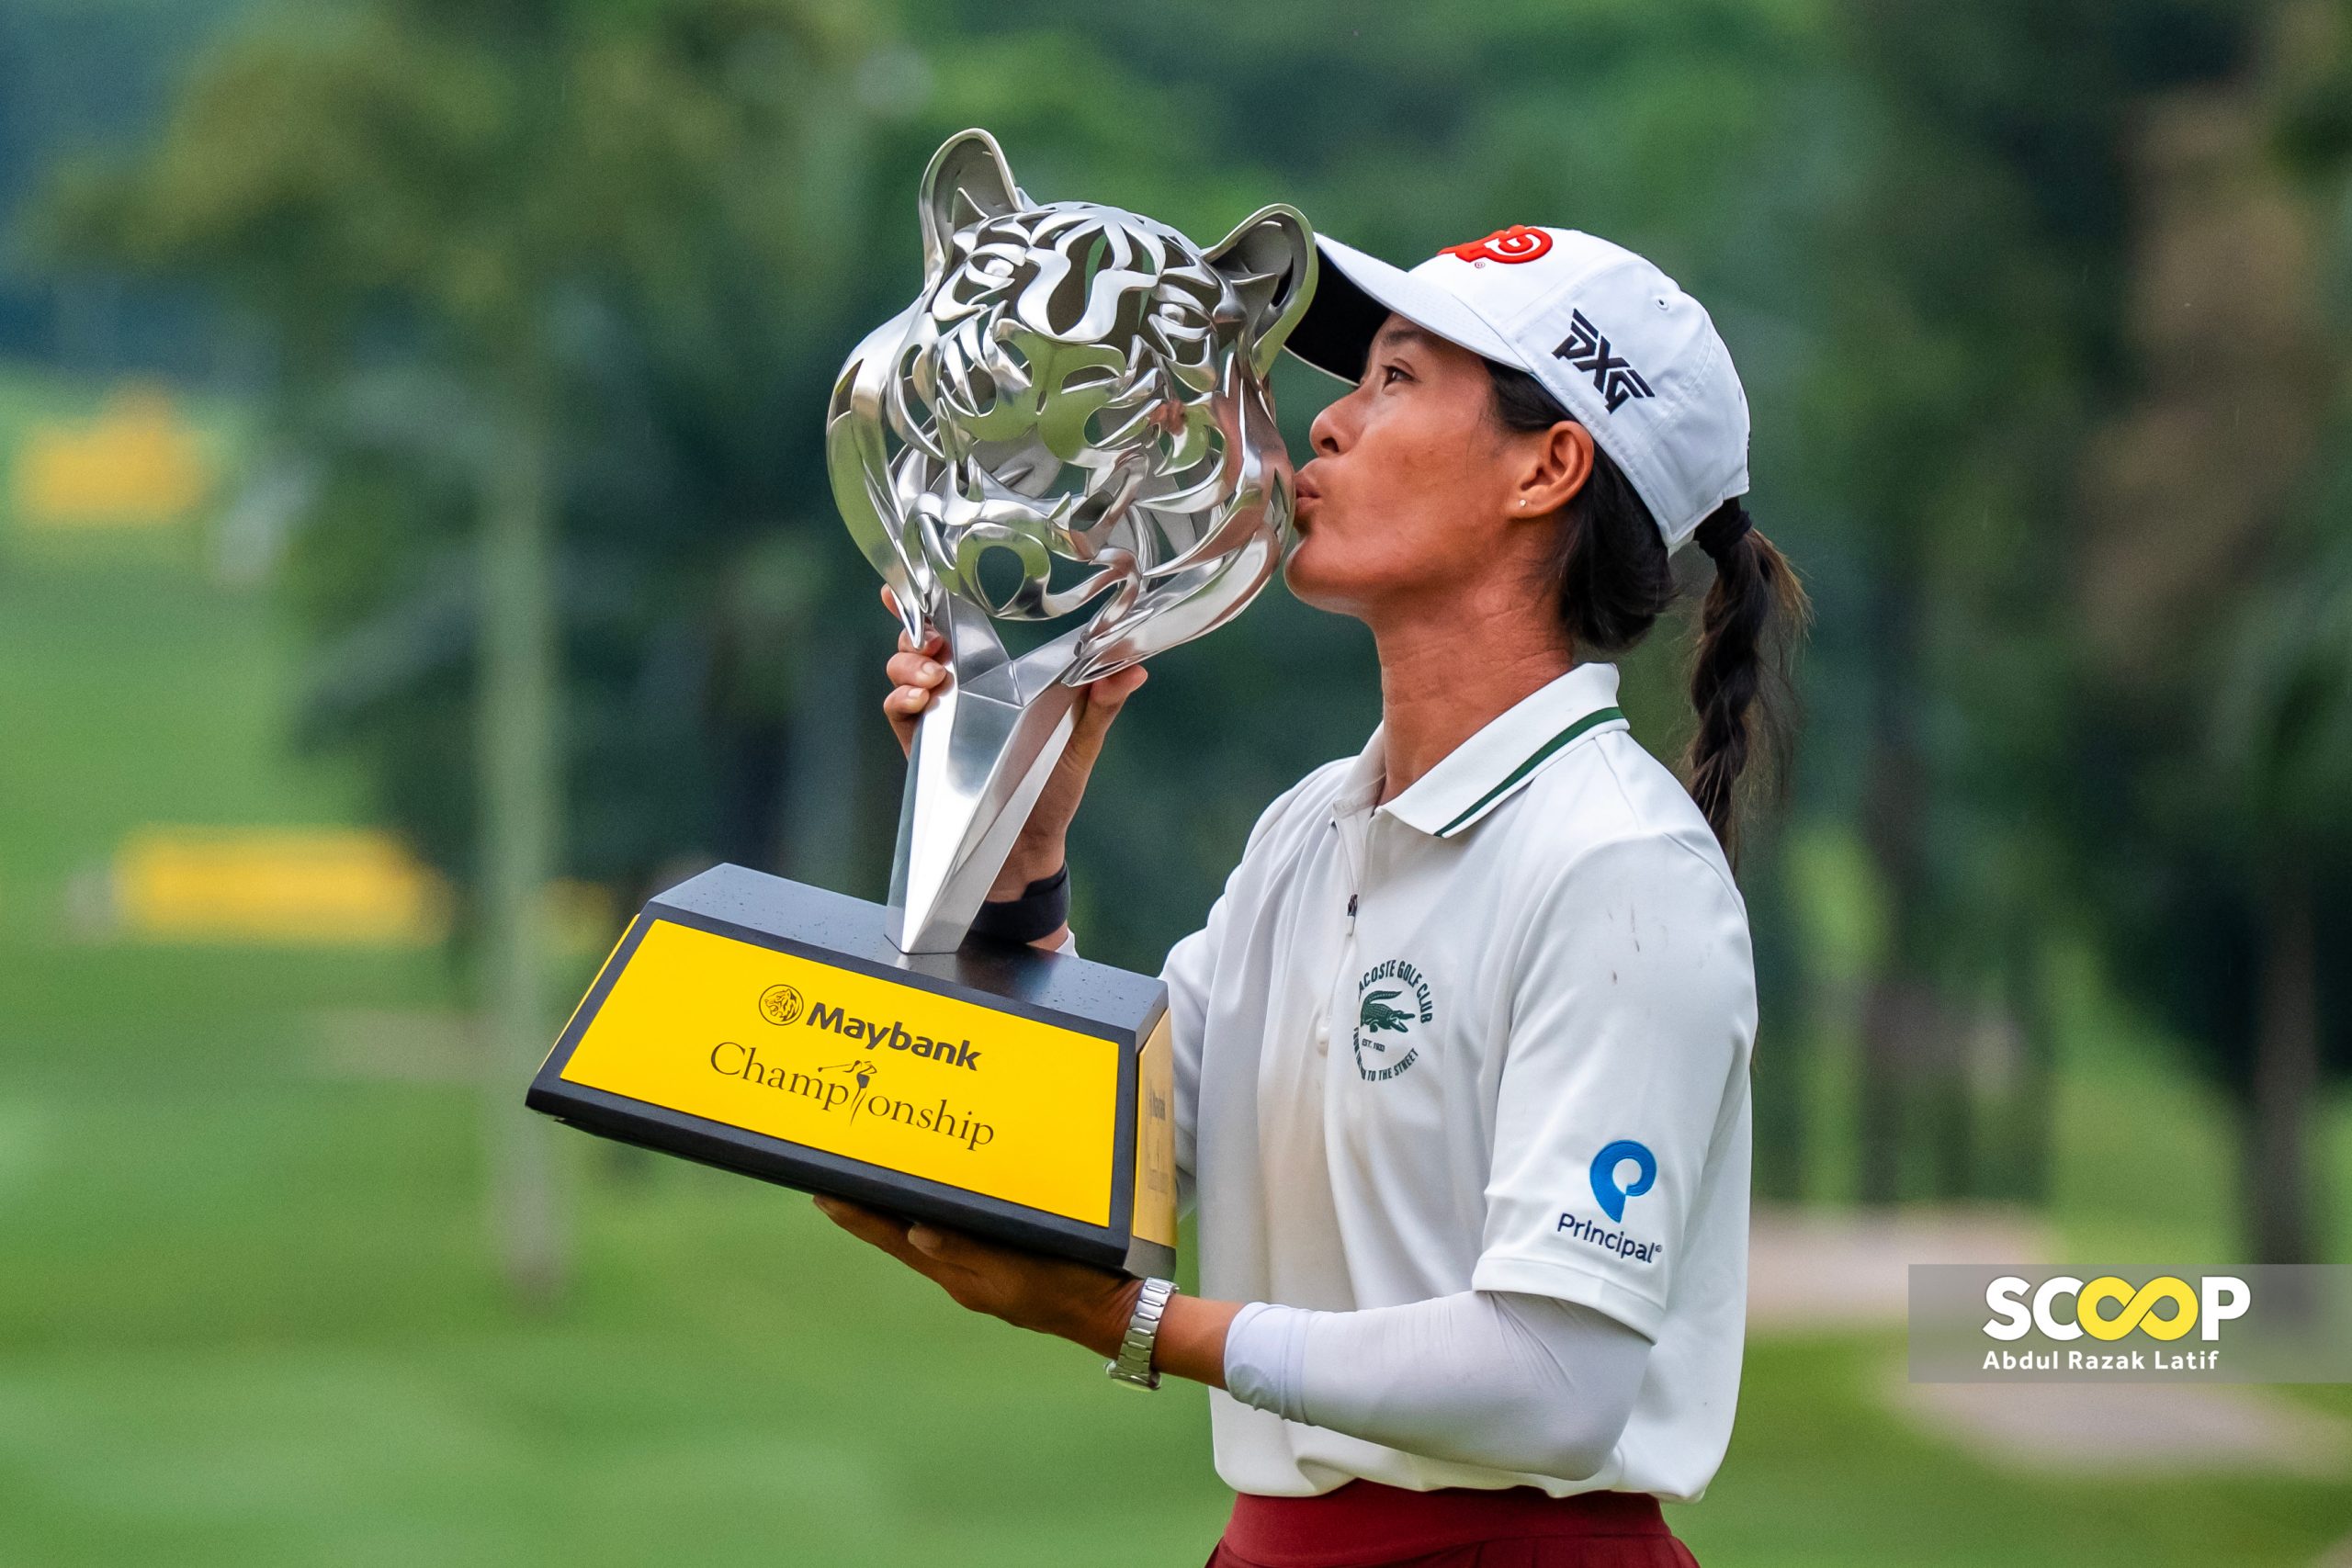 Boutier clinches Tiger Trophy at Maybank Championship